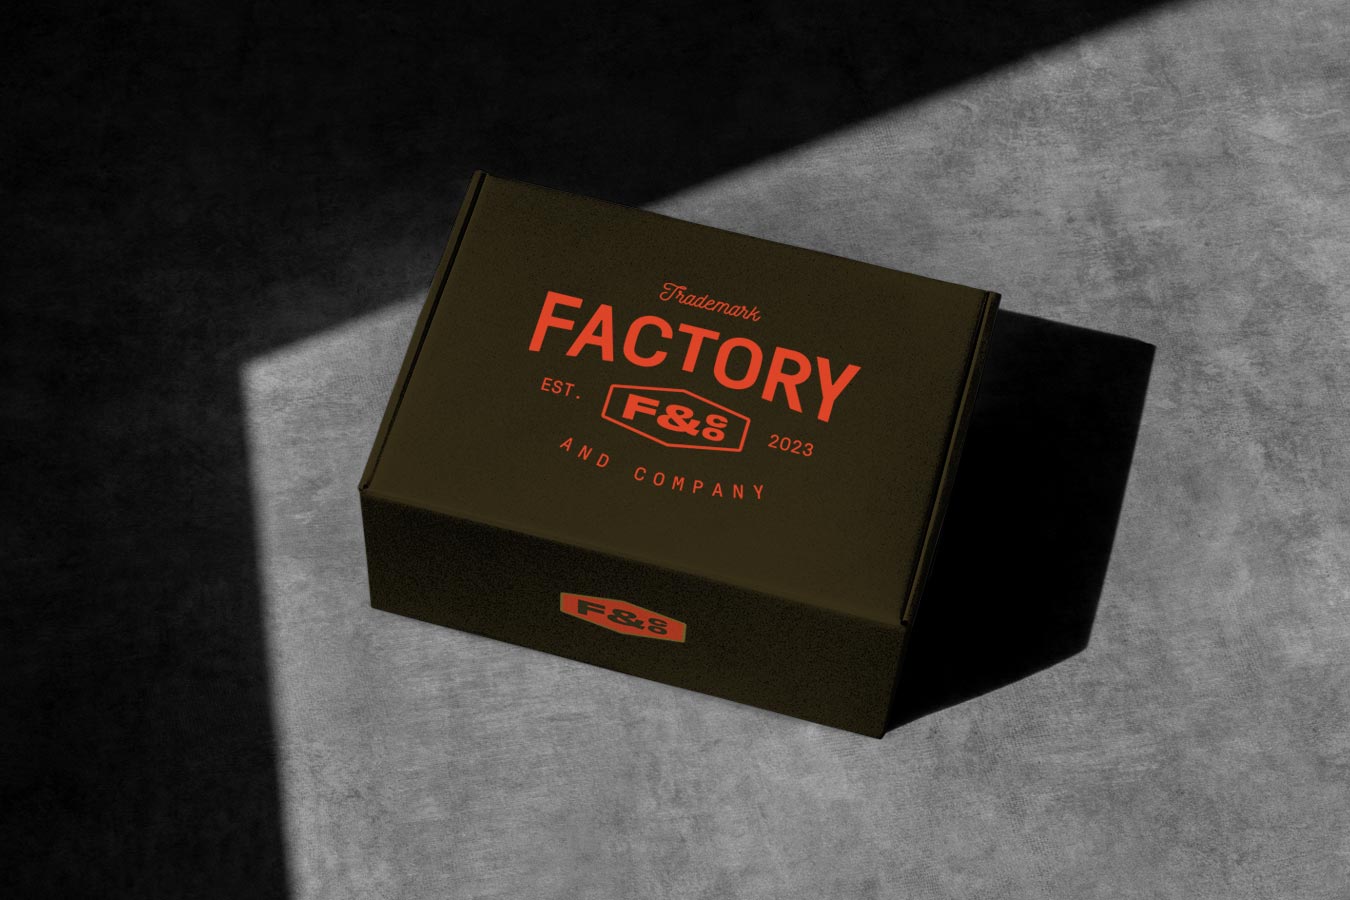 A dark-green box with the orange Factory logo on top, placed on a granite countertop.